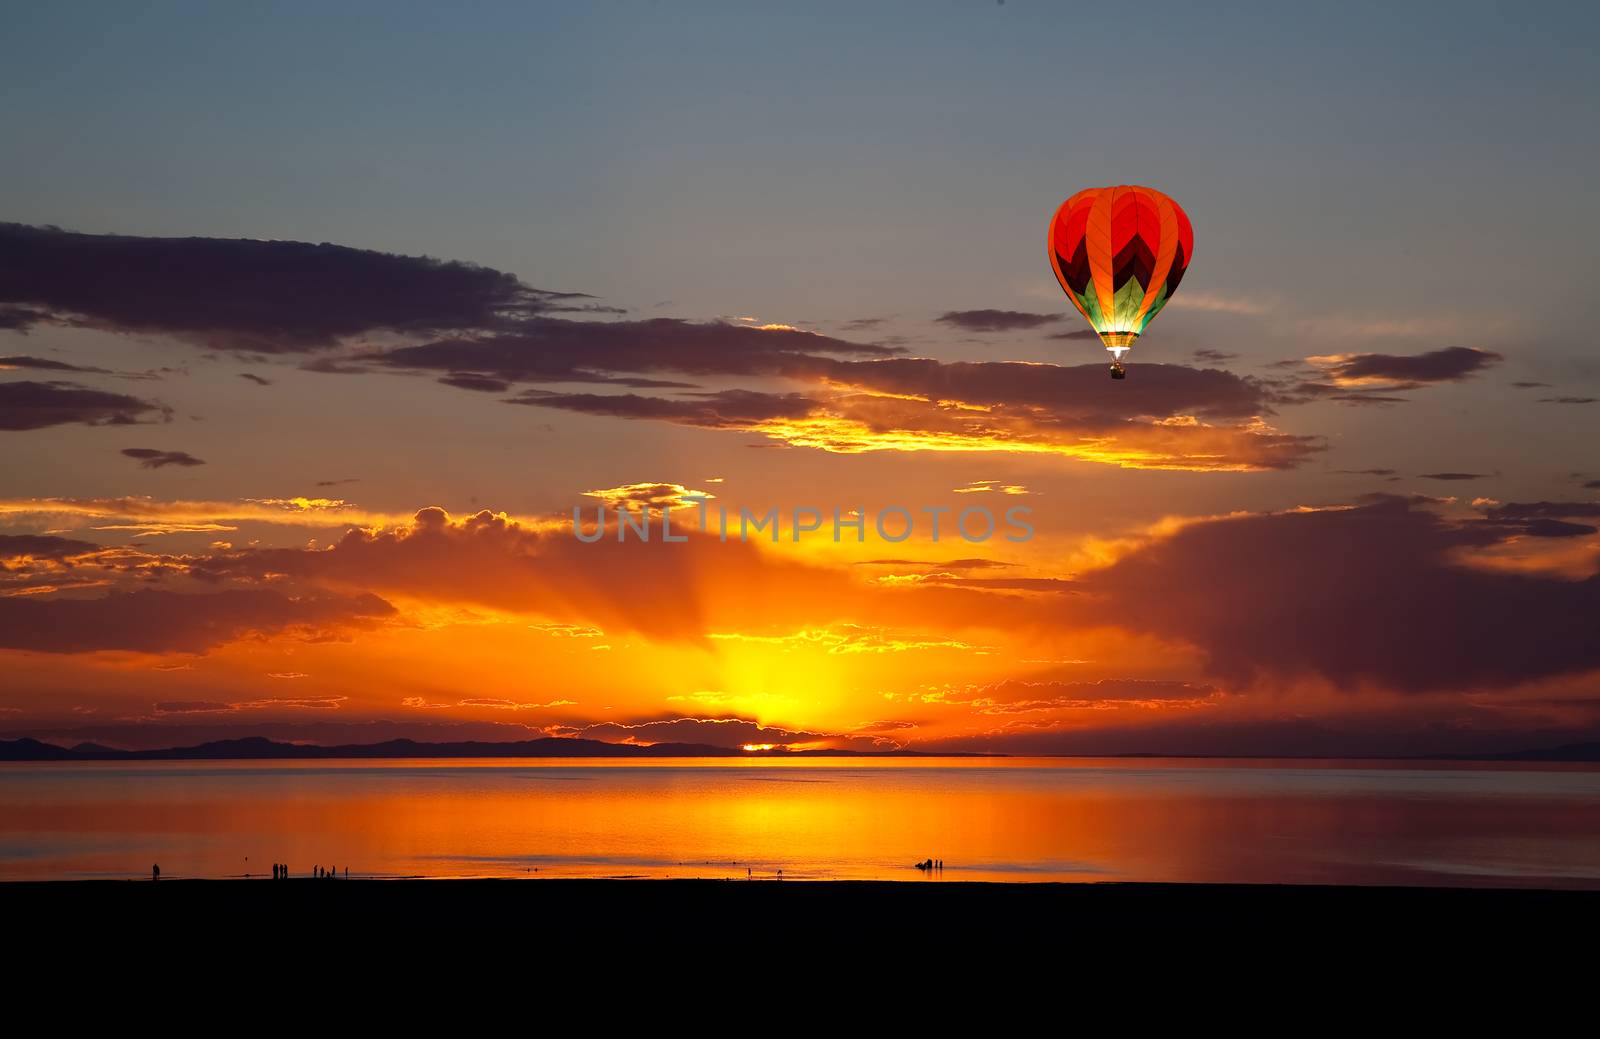 The colorful sunset scenery at the Great Salt Lake in Utah